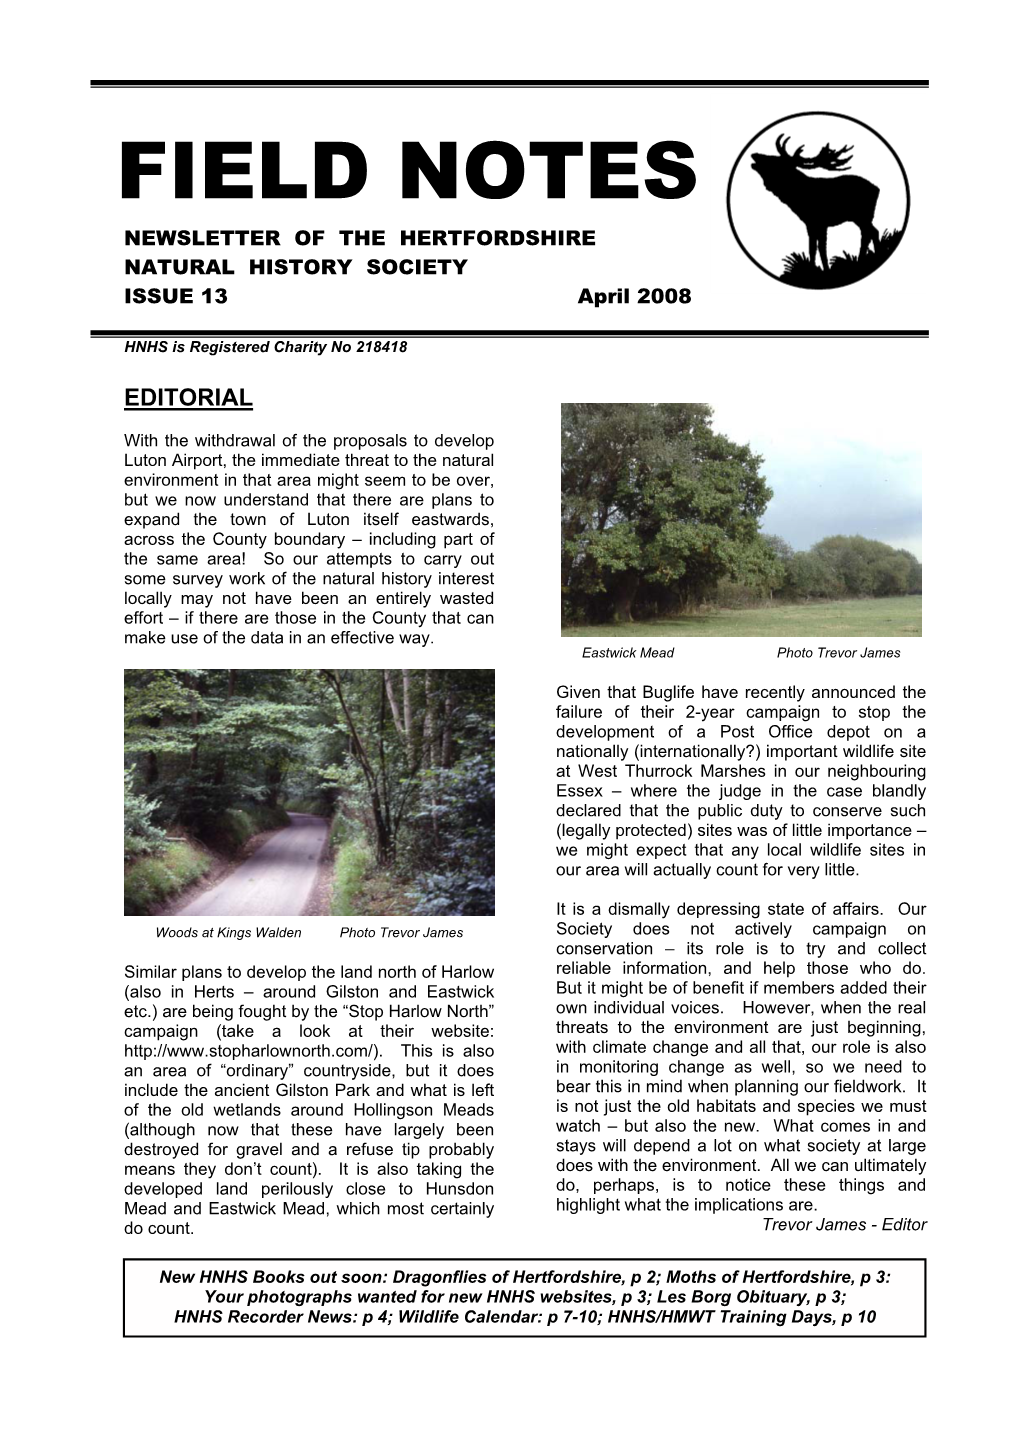 FIELD NOTES NEWSLETTER of the HERTFORDSHIRE NATURAL HISTORY SOCIETY ISSUE 13 April 2008